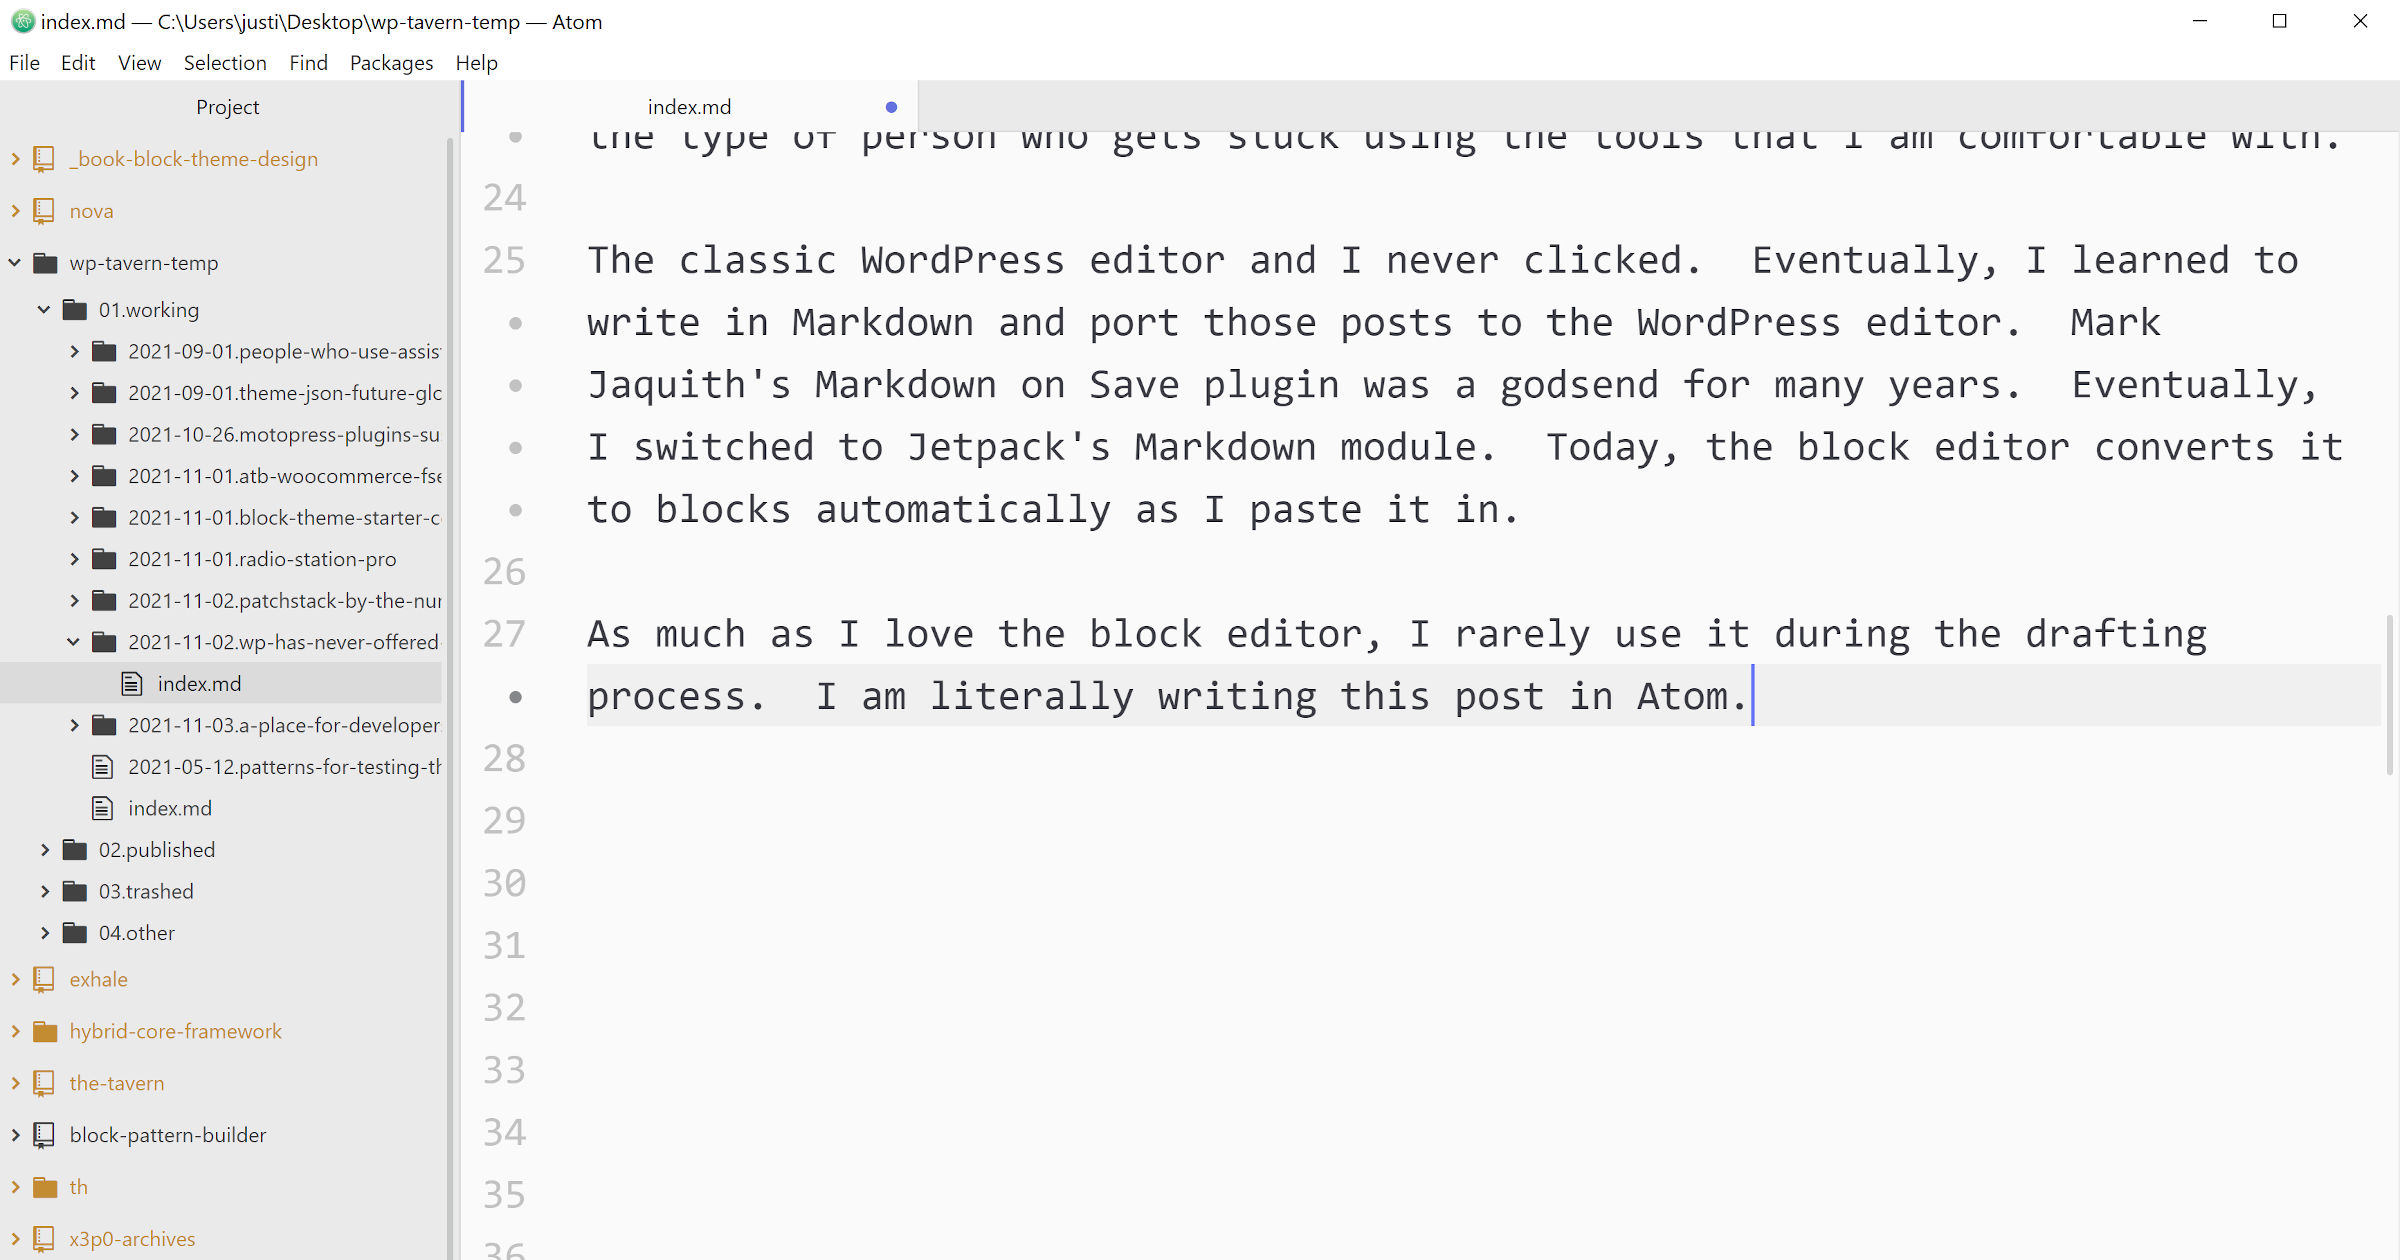 Screenshot of a blog post written in a monospace font in the Atom editor.